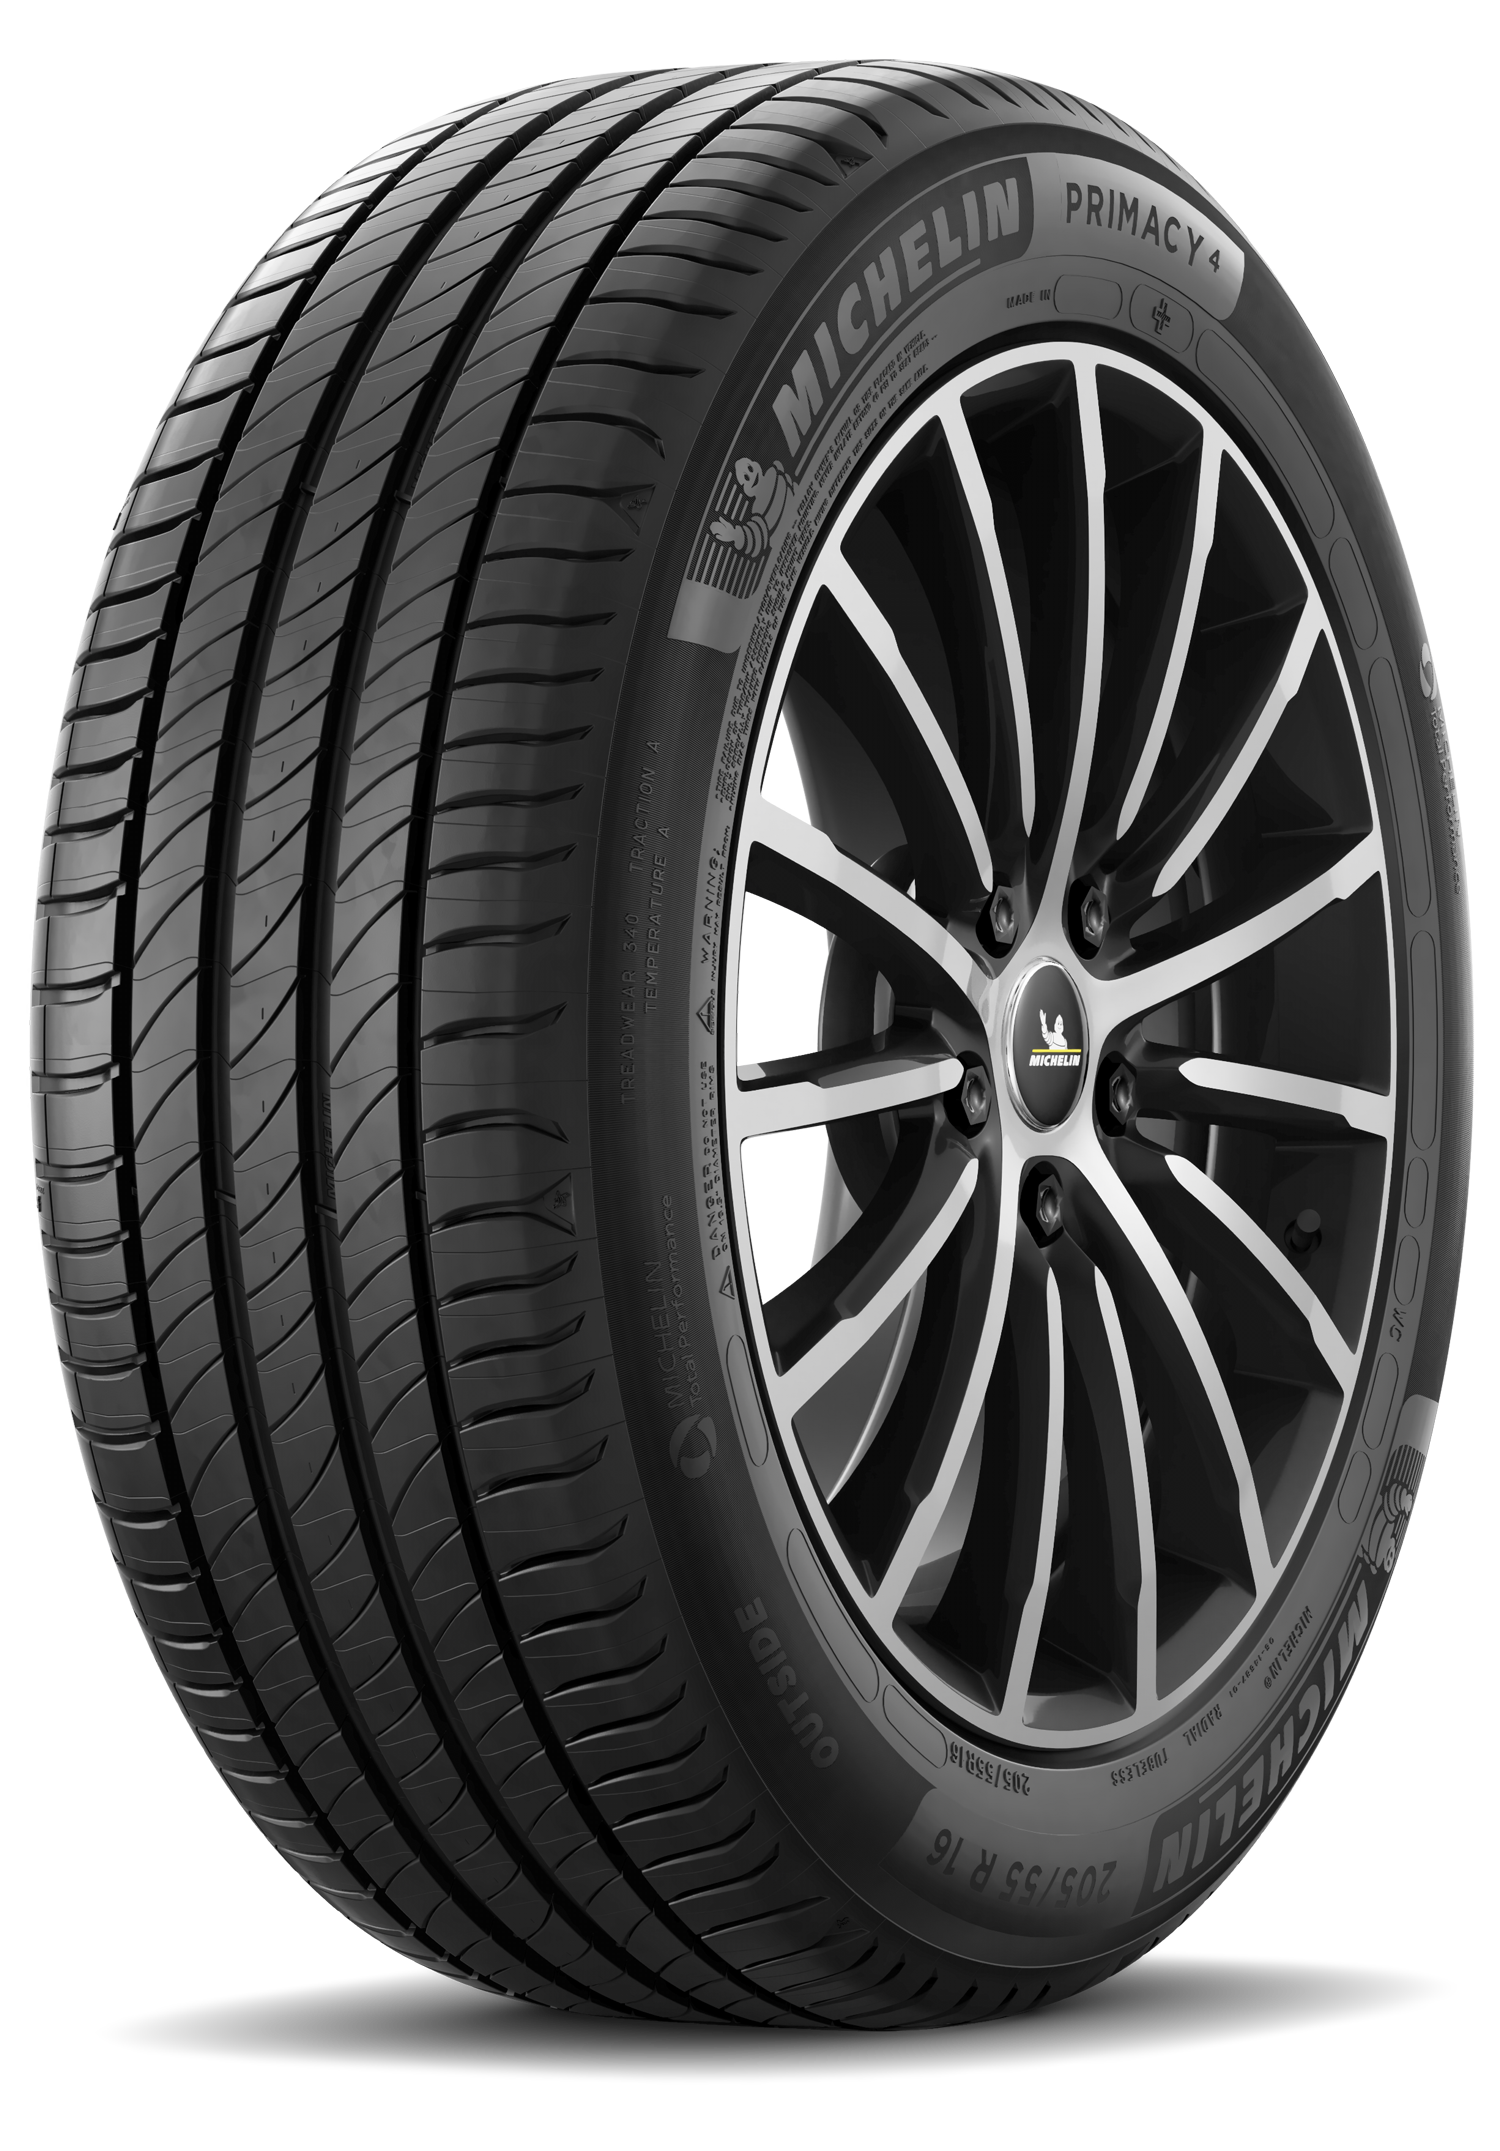 Michelin Primacy 4 Plus - Tyre Reviews and Tests